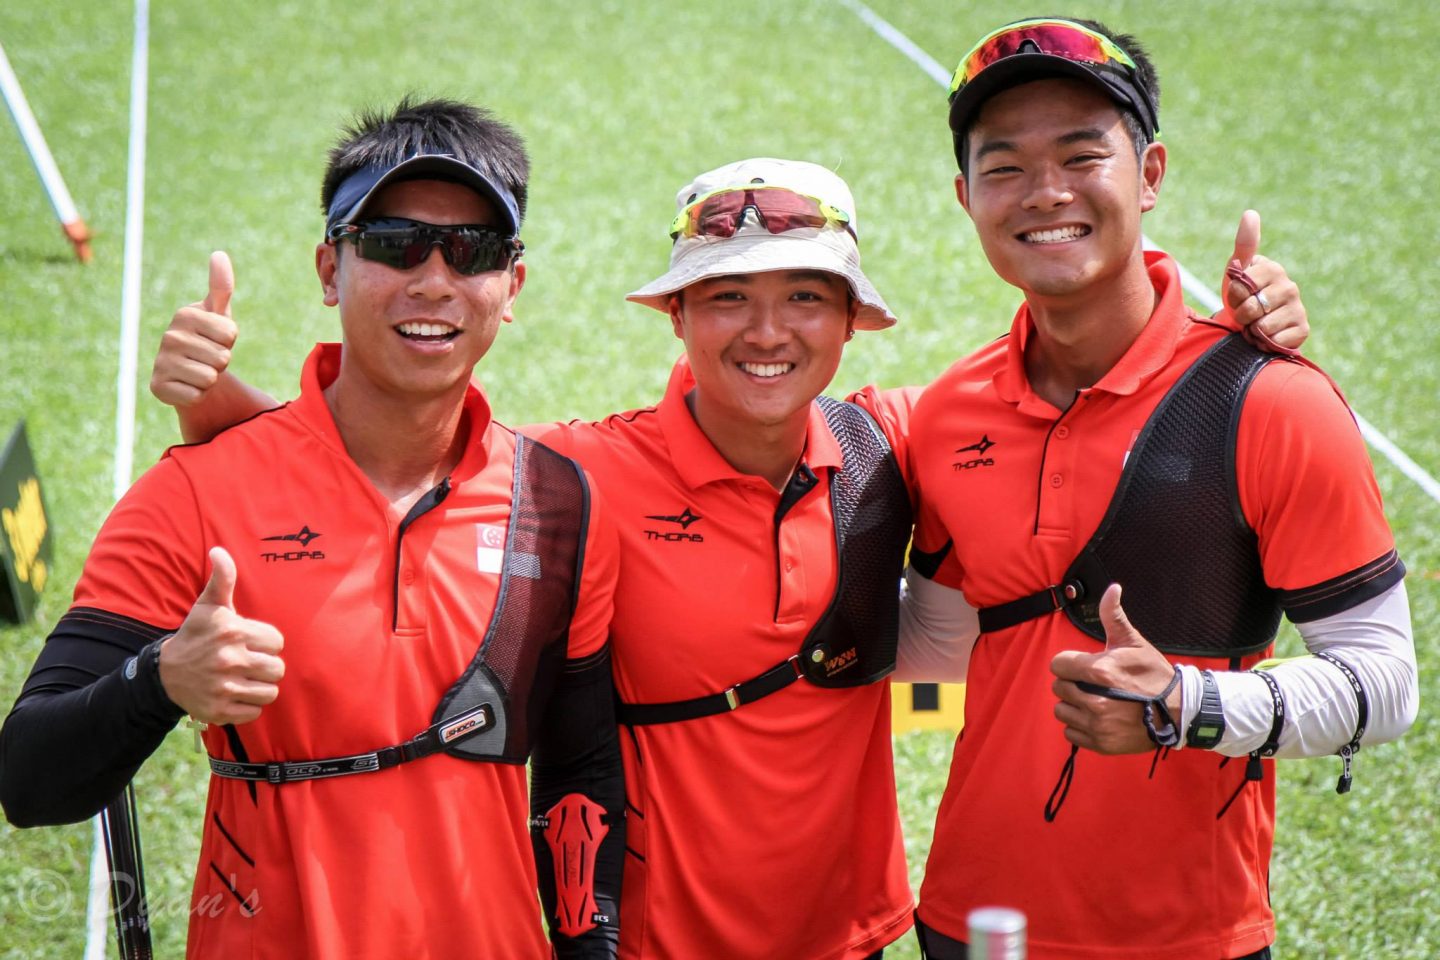 SL Archery Tan Si Lie Tan (left-most) with his teammates at the 2015 SEA Games. Tan won the individual bronze and was part of the team that took home the men's team bronze medal. Going into the Games, he was dealing with an old shoulder injury and his Final Year Project in university.